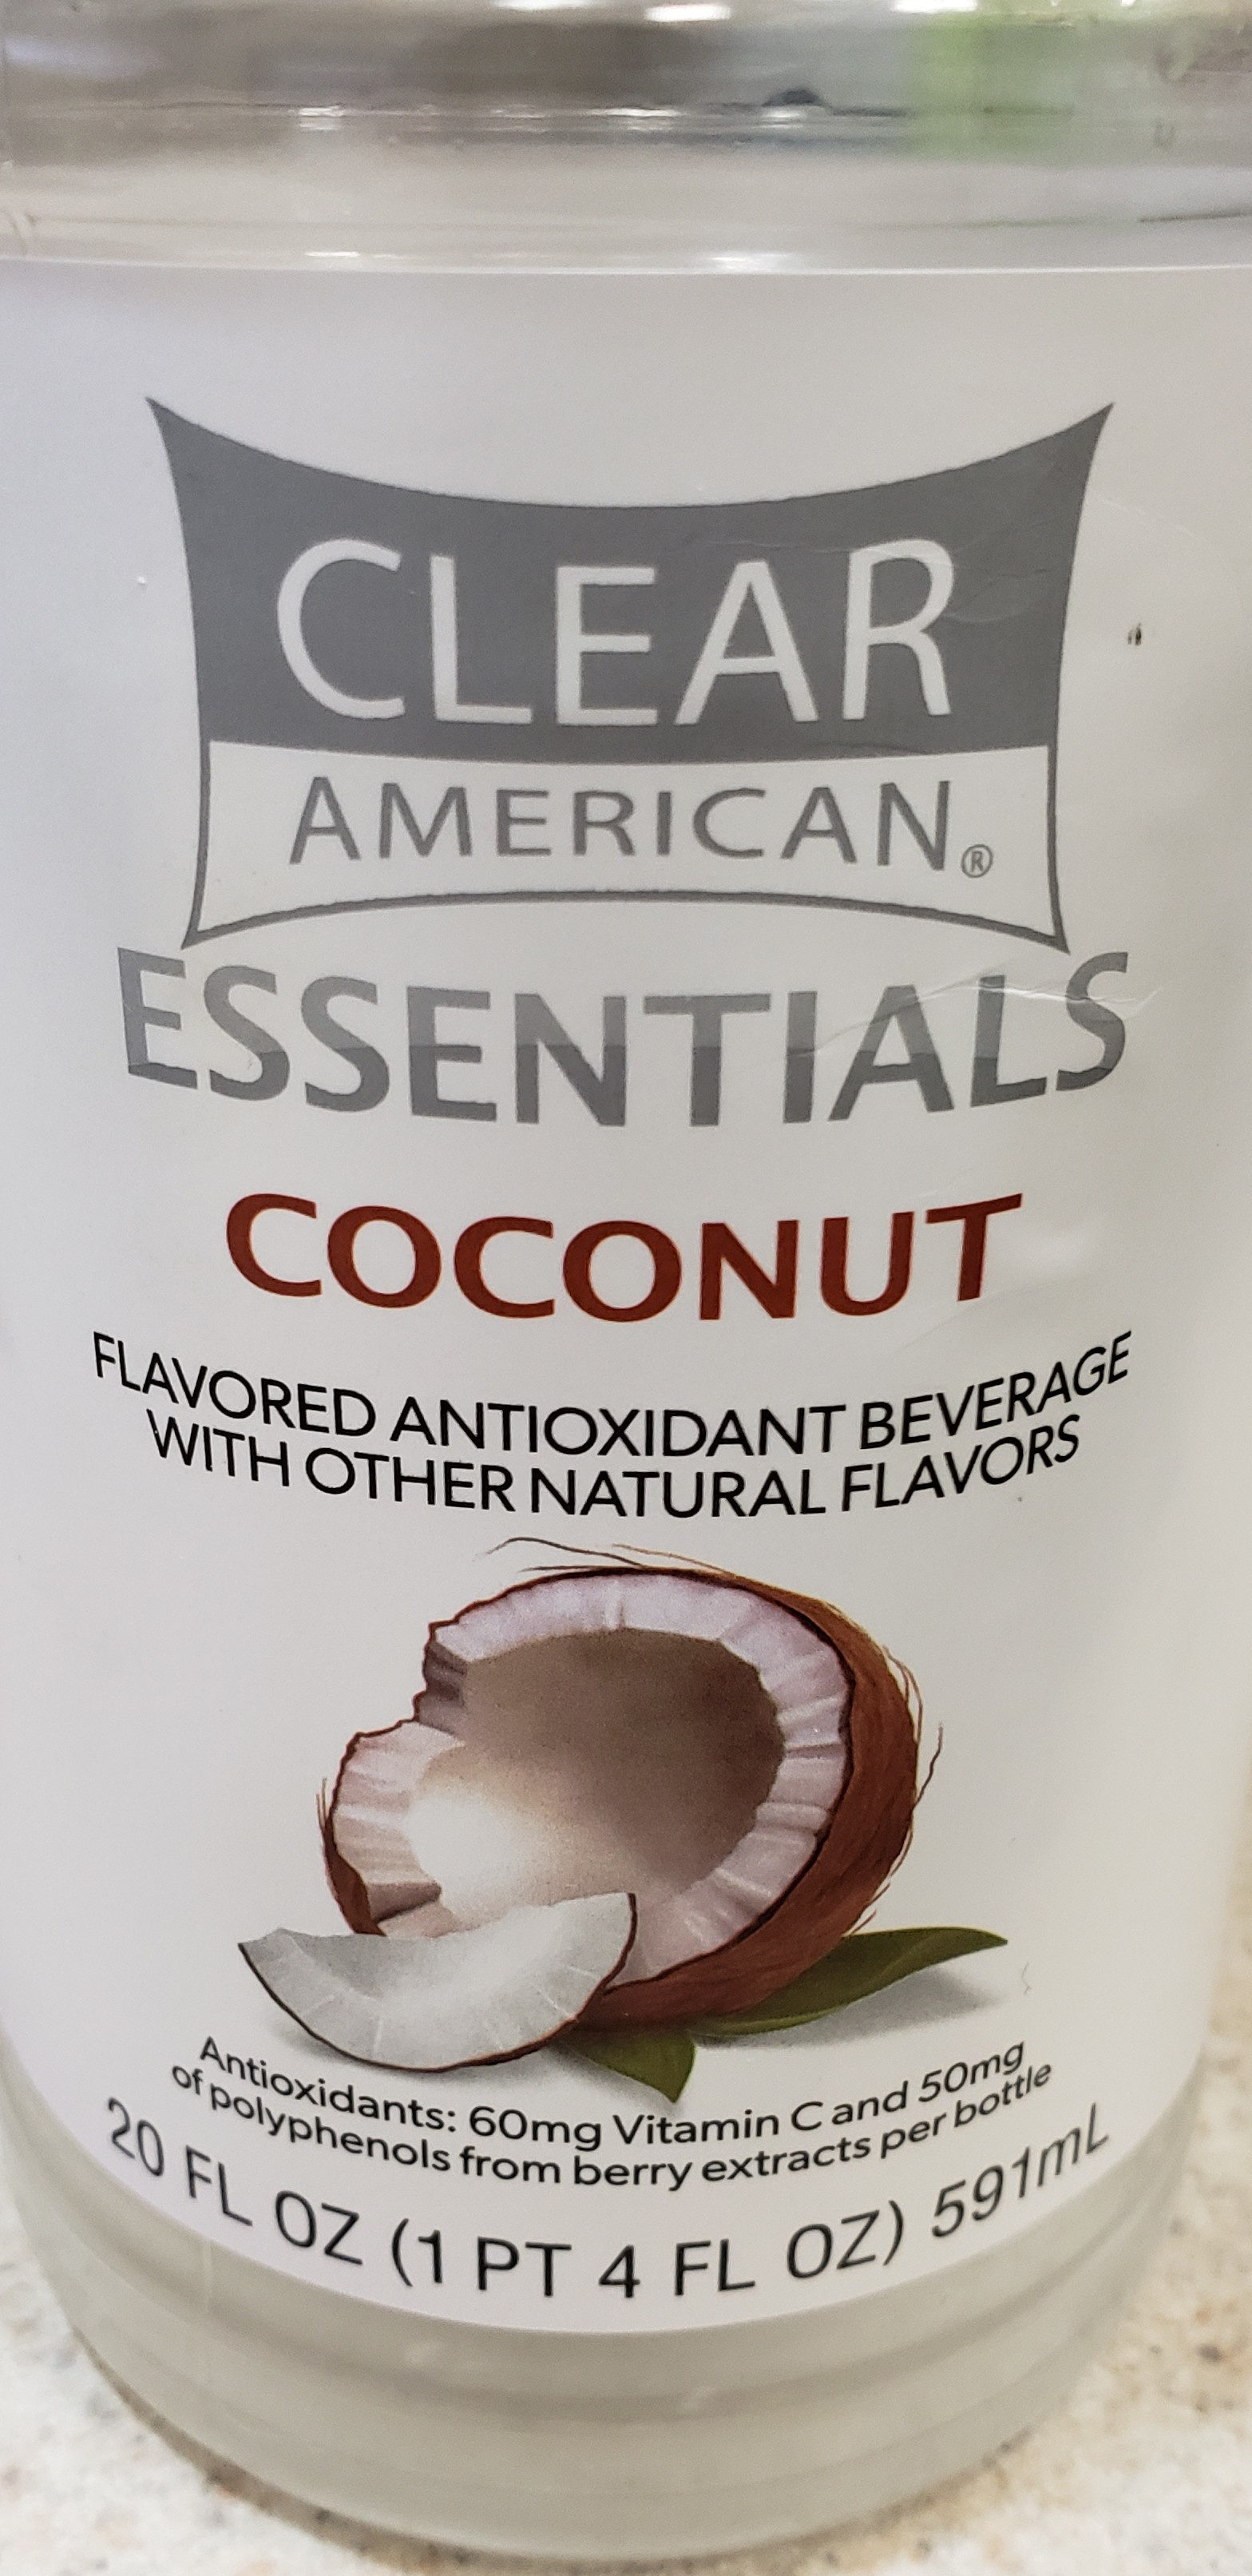 Coconut flavored antioxidant beverage, coconut - Product